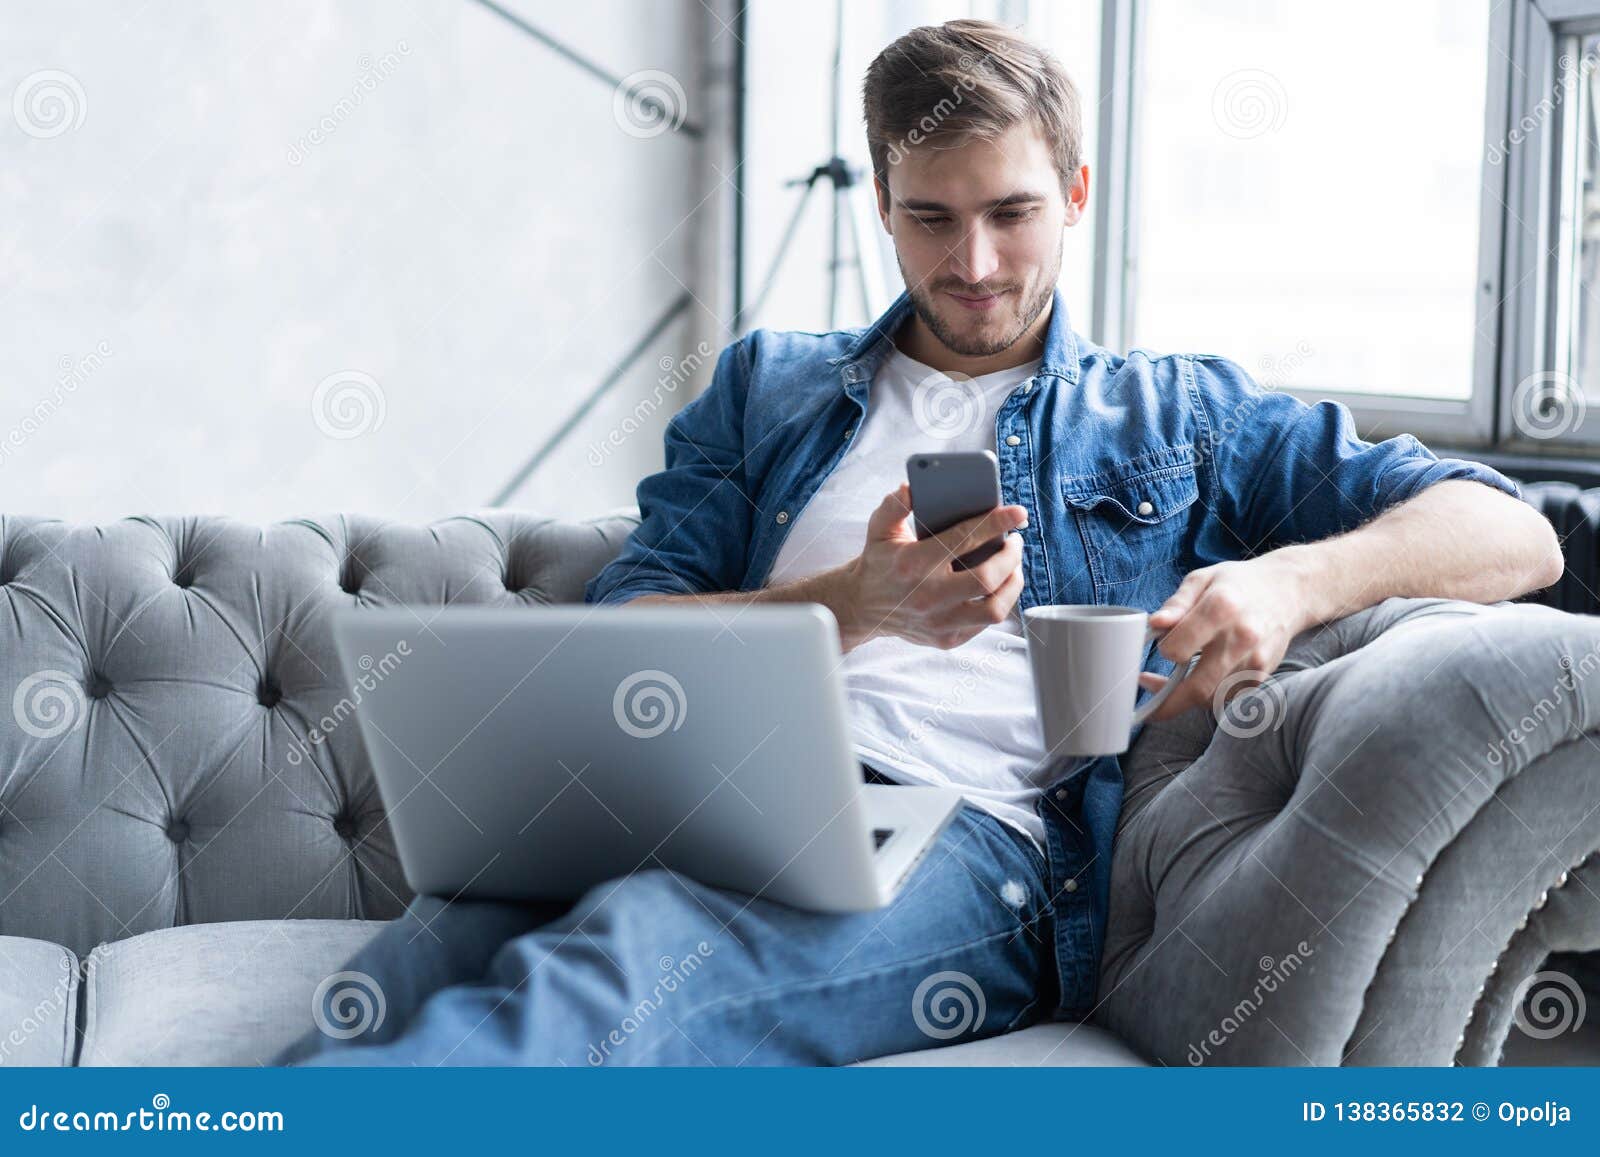 young man using his smartphone for online banking - sitting on sofa with laptop on leap.